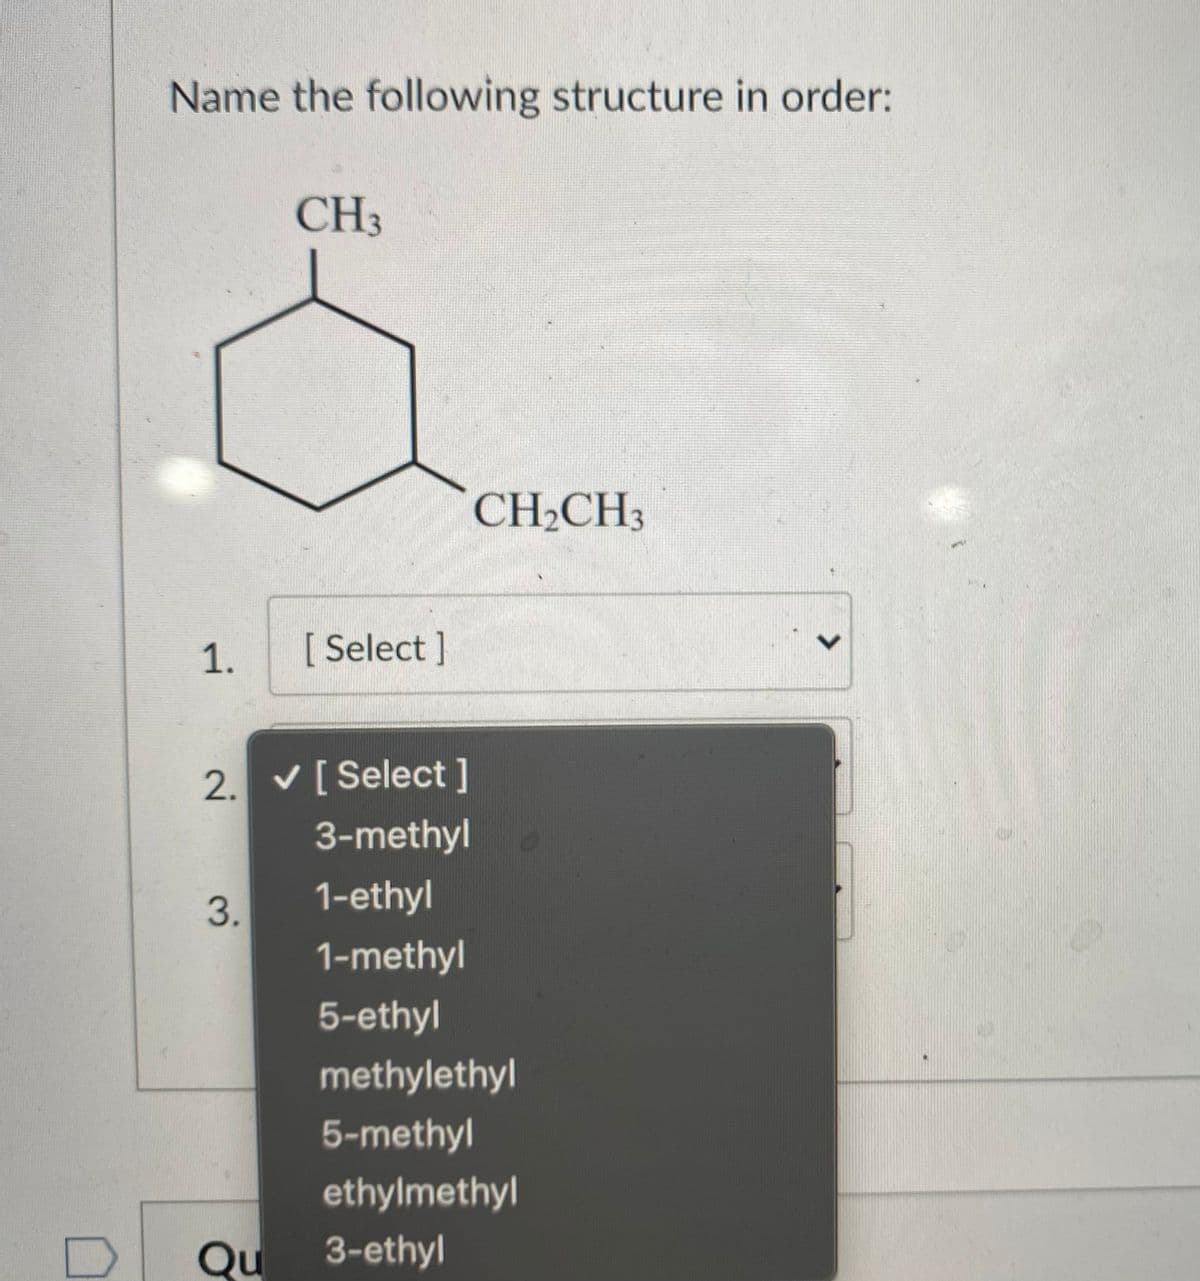 Name the following structure in order:
CH3
CH2CH3
1.
[ Select ]
2. v[Select]
3-methyl
3.
1-ethyl
1-methyl
5-ethyl
methylethyl
5-methyl
ethylmethyl
Qu
3-ethyl
